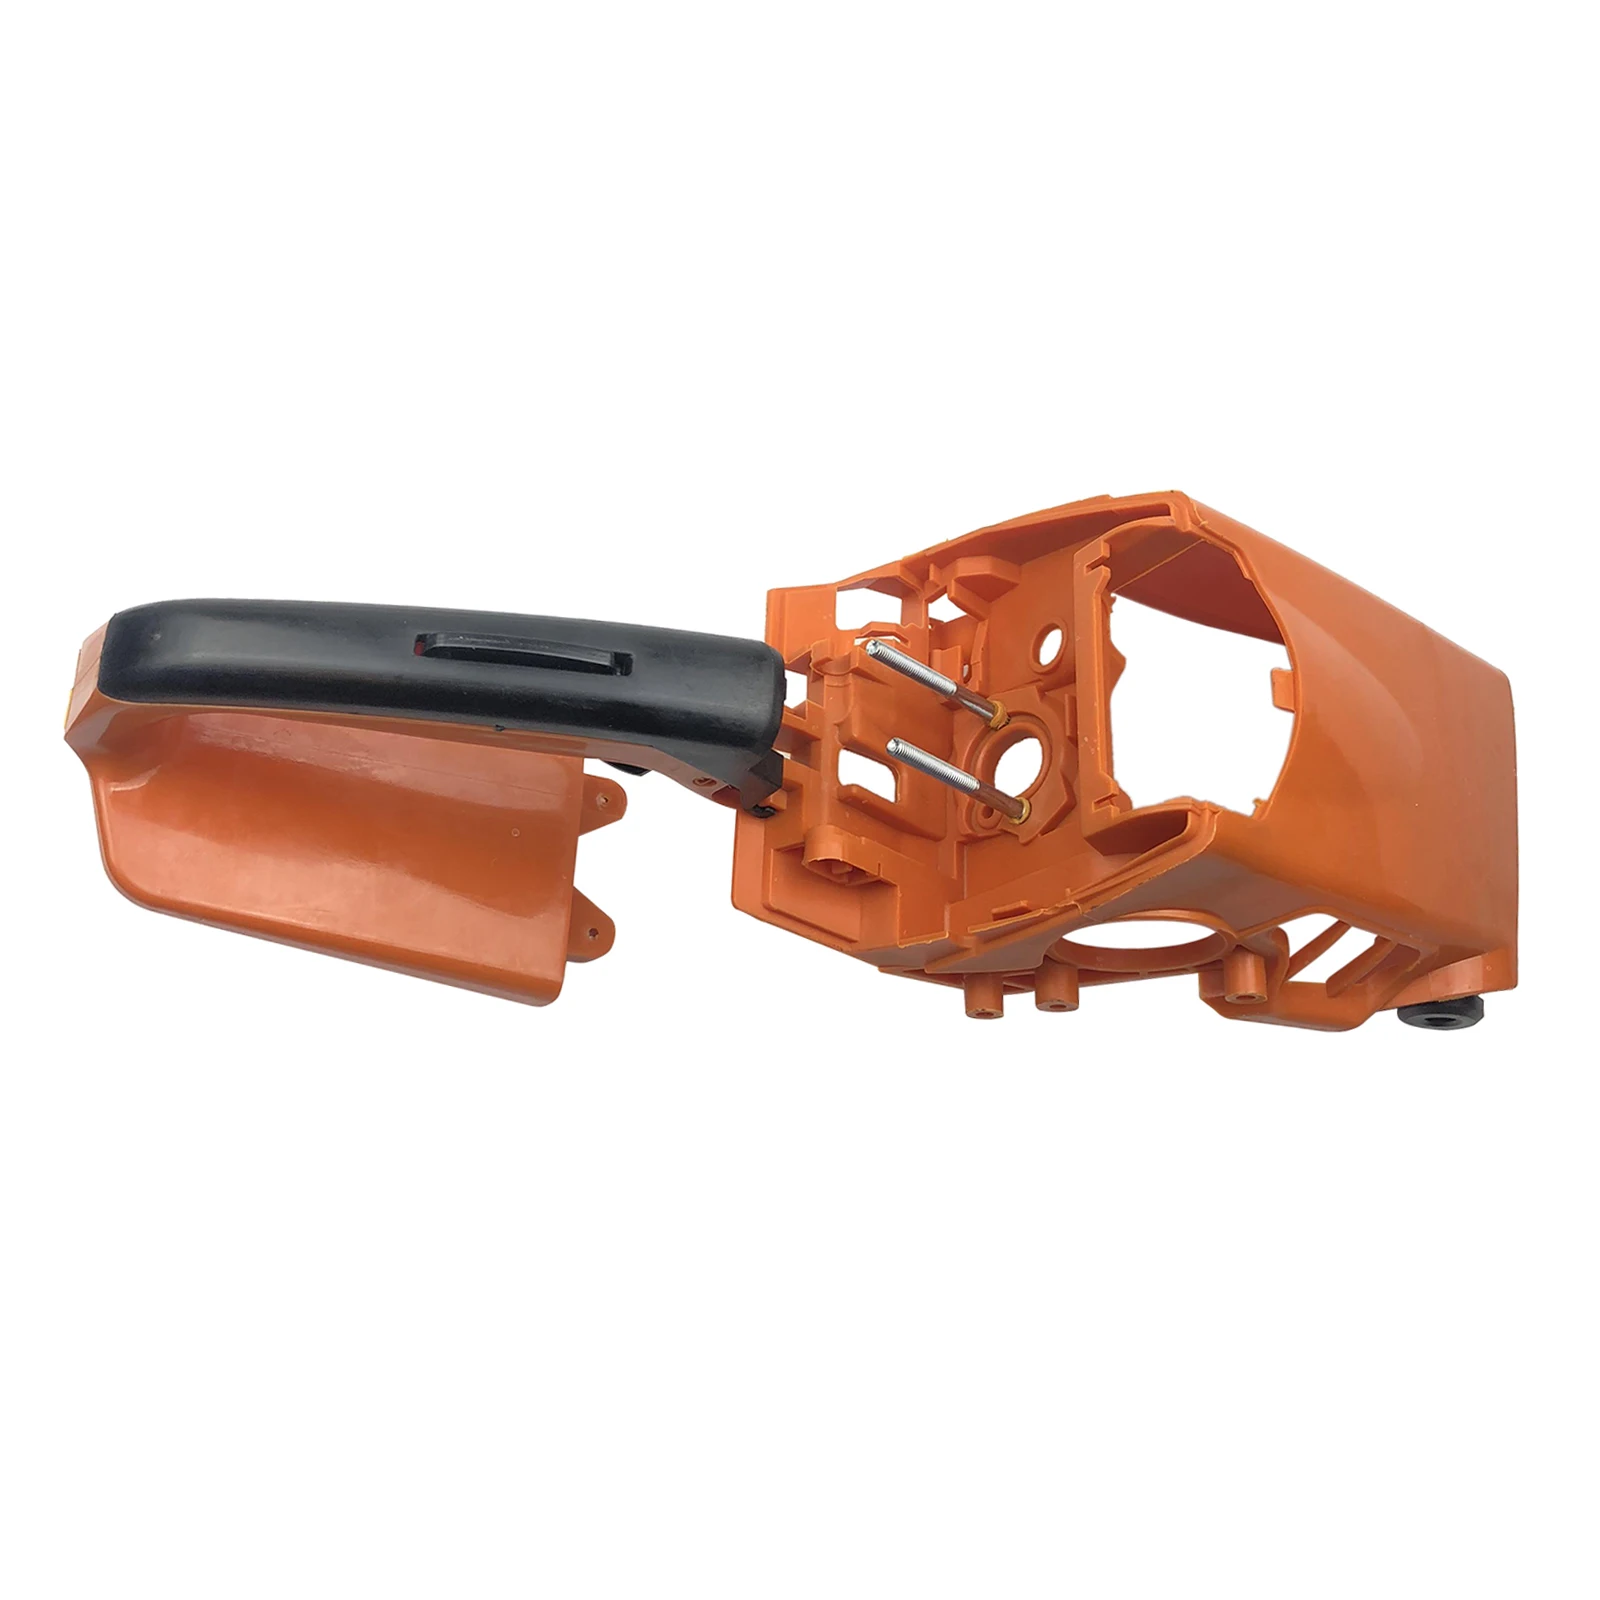 Back Handle and Cylinder Cover Fits for STIHL 021 023 025 MS210 MS230 MS250 Chainsaws Accessories